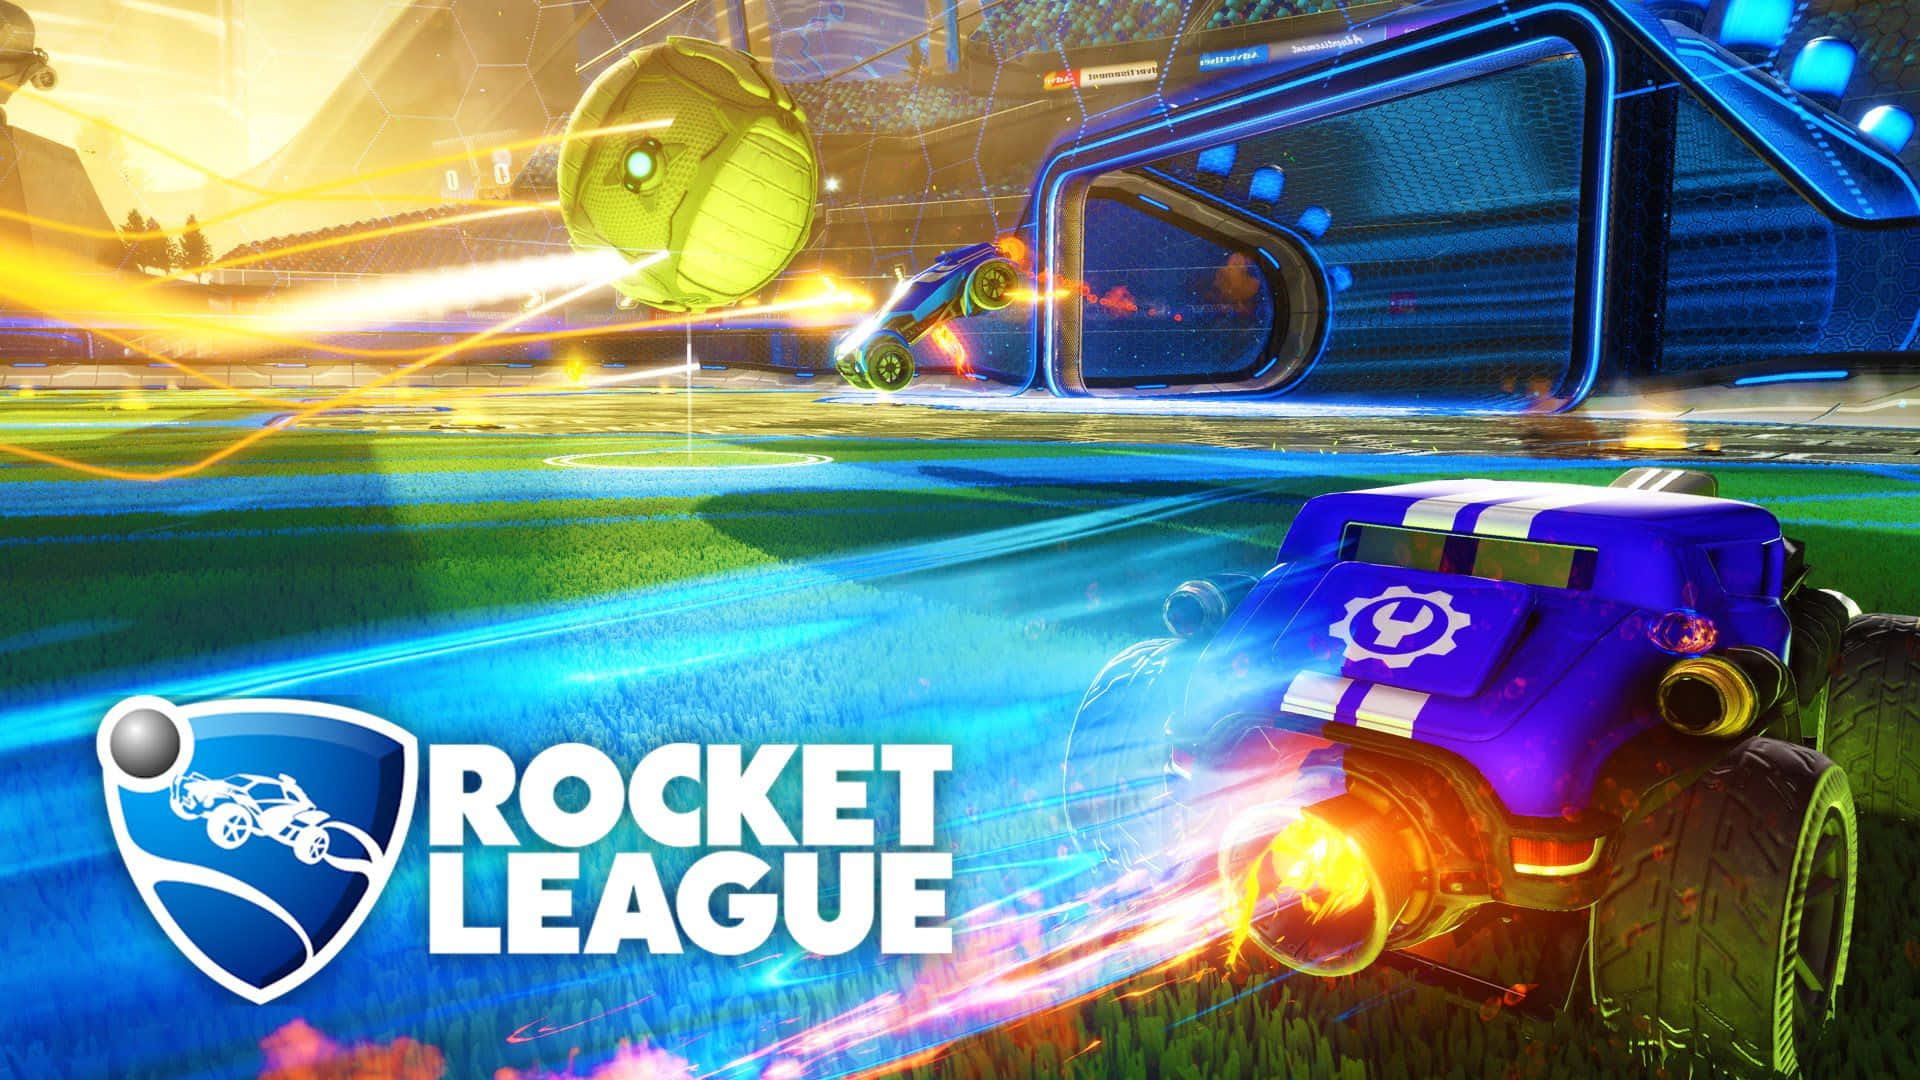 720p Rocket League Background Soccer Ball Background